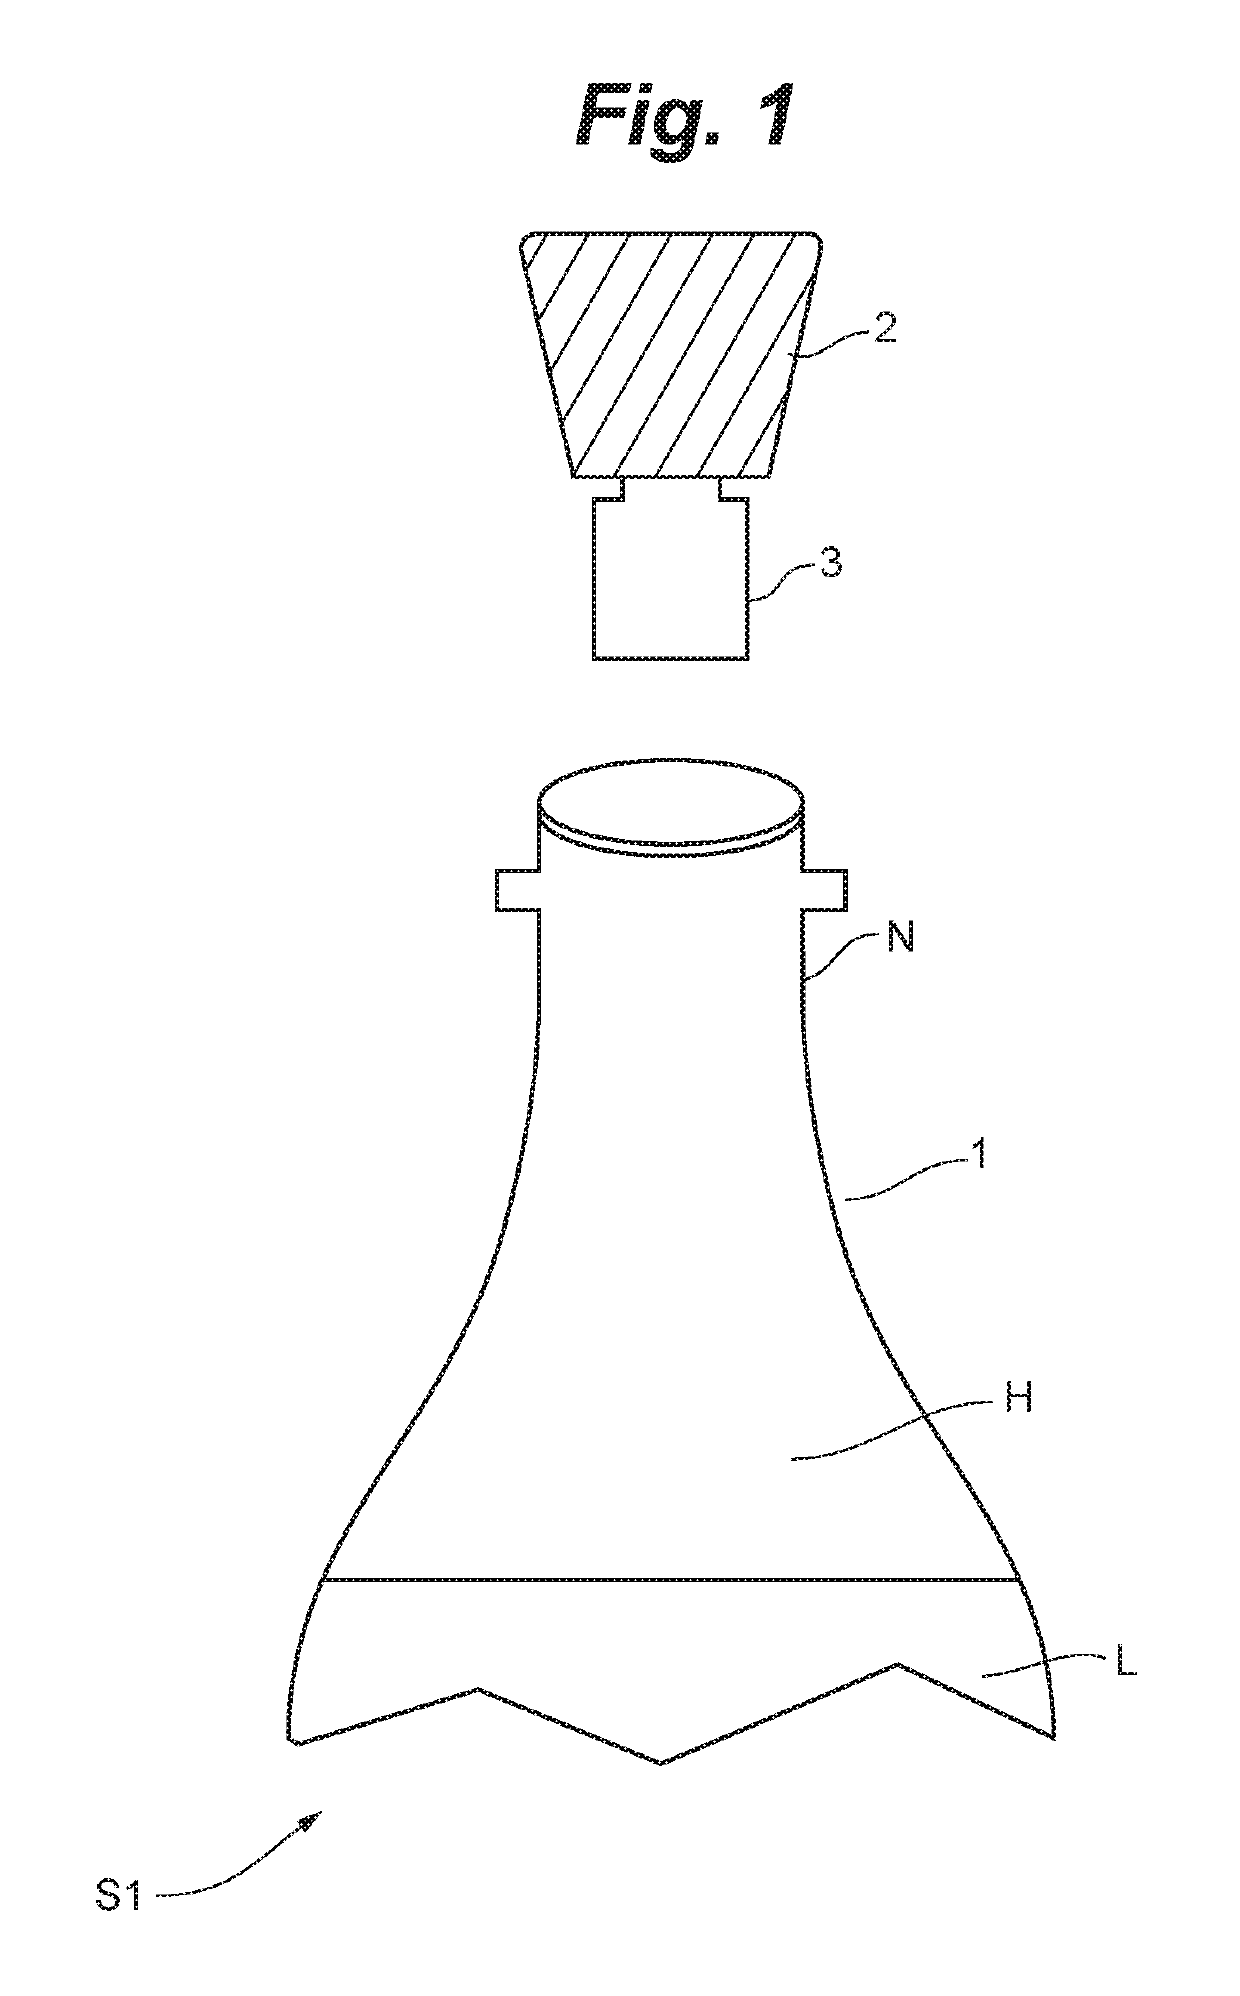 Systems and methods for de-oxygenation of a closed container